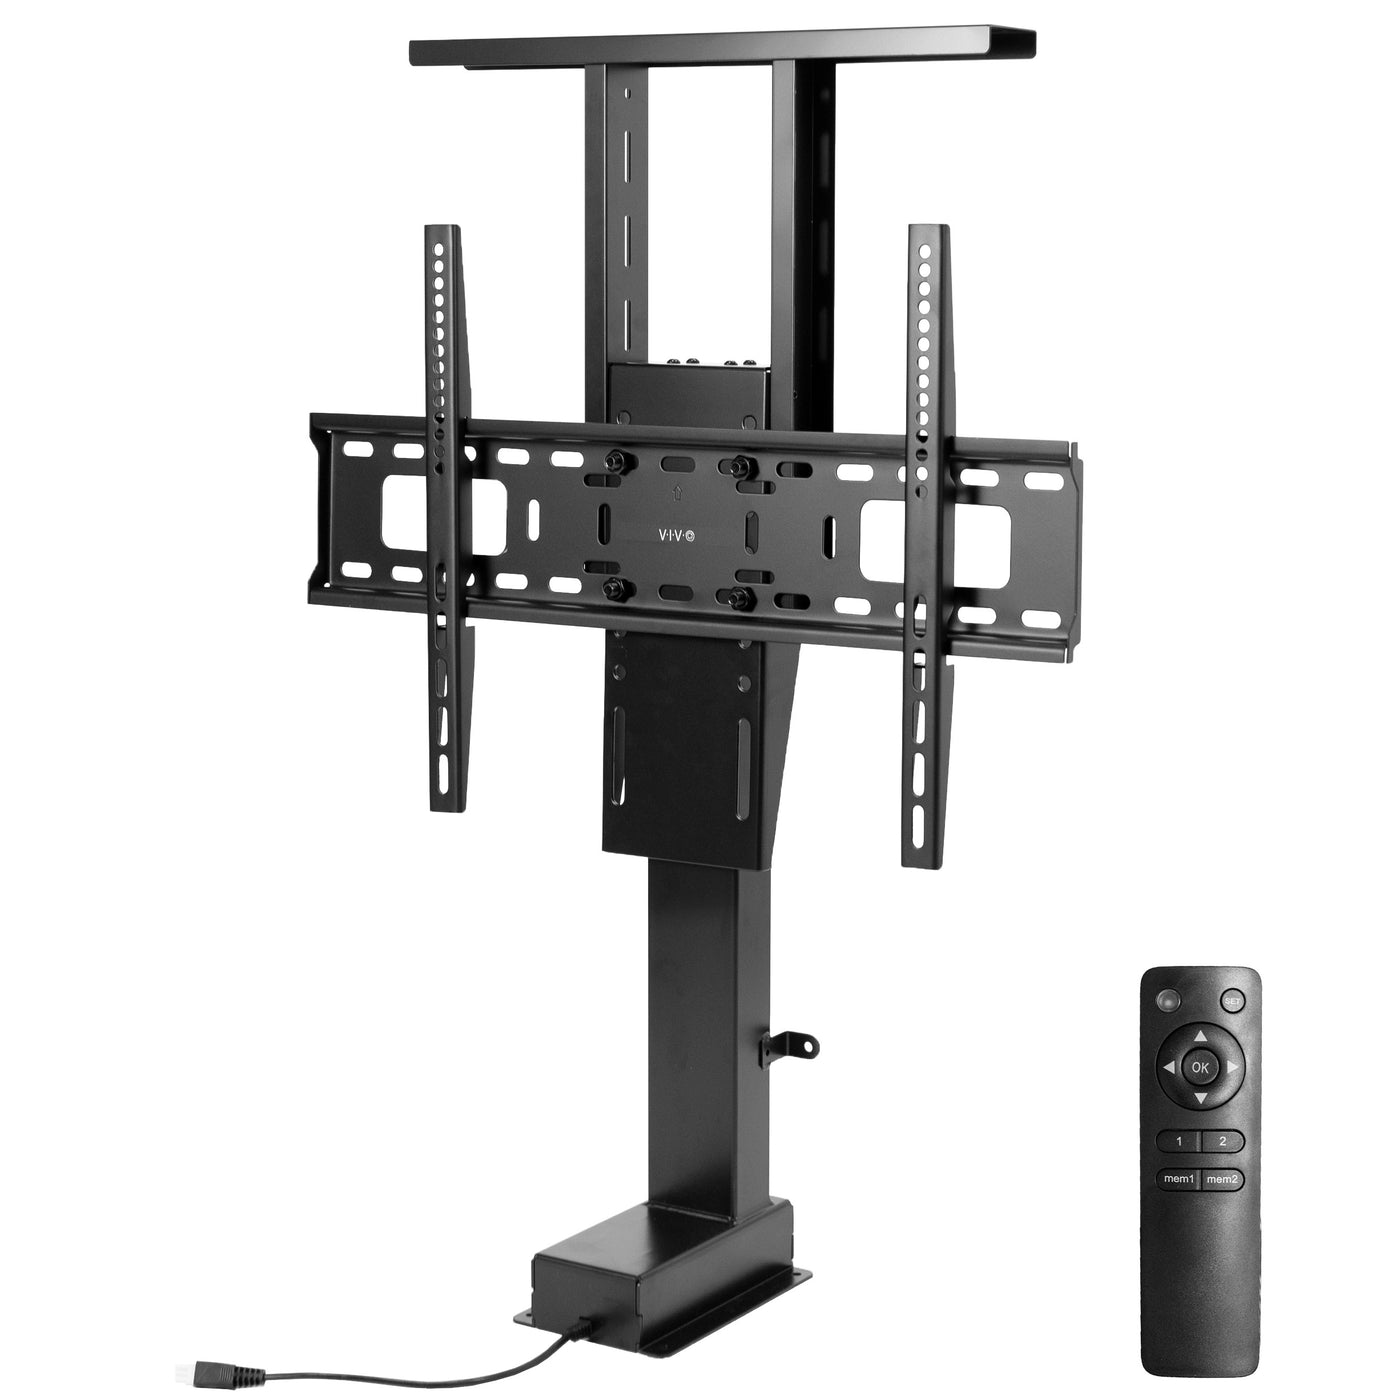  Motorized Large TV Stand for 37 to 77 inch Screens, Vertical Lift Television Stand with Remote Control, Compact TV Mount Bracket